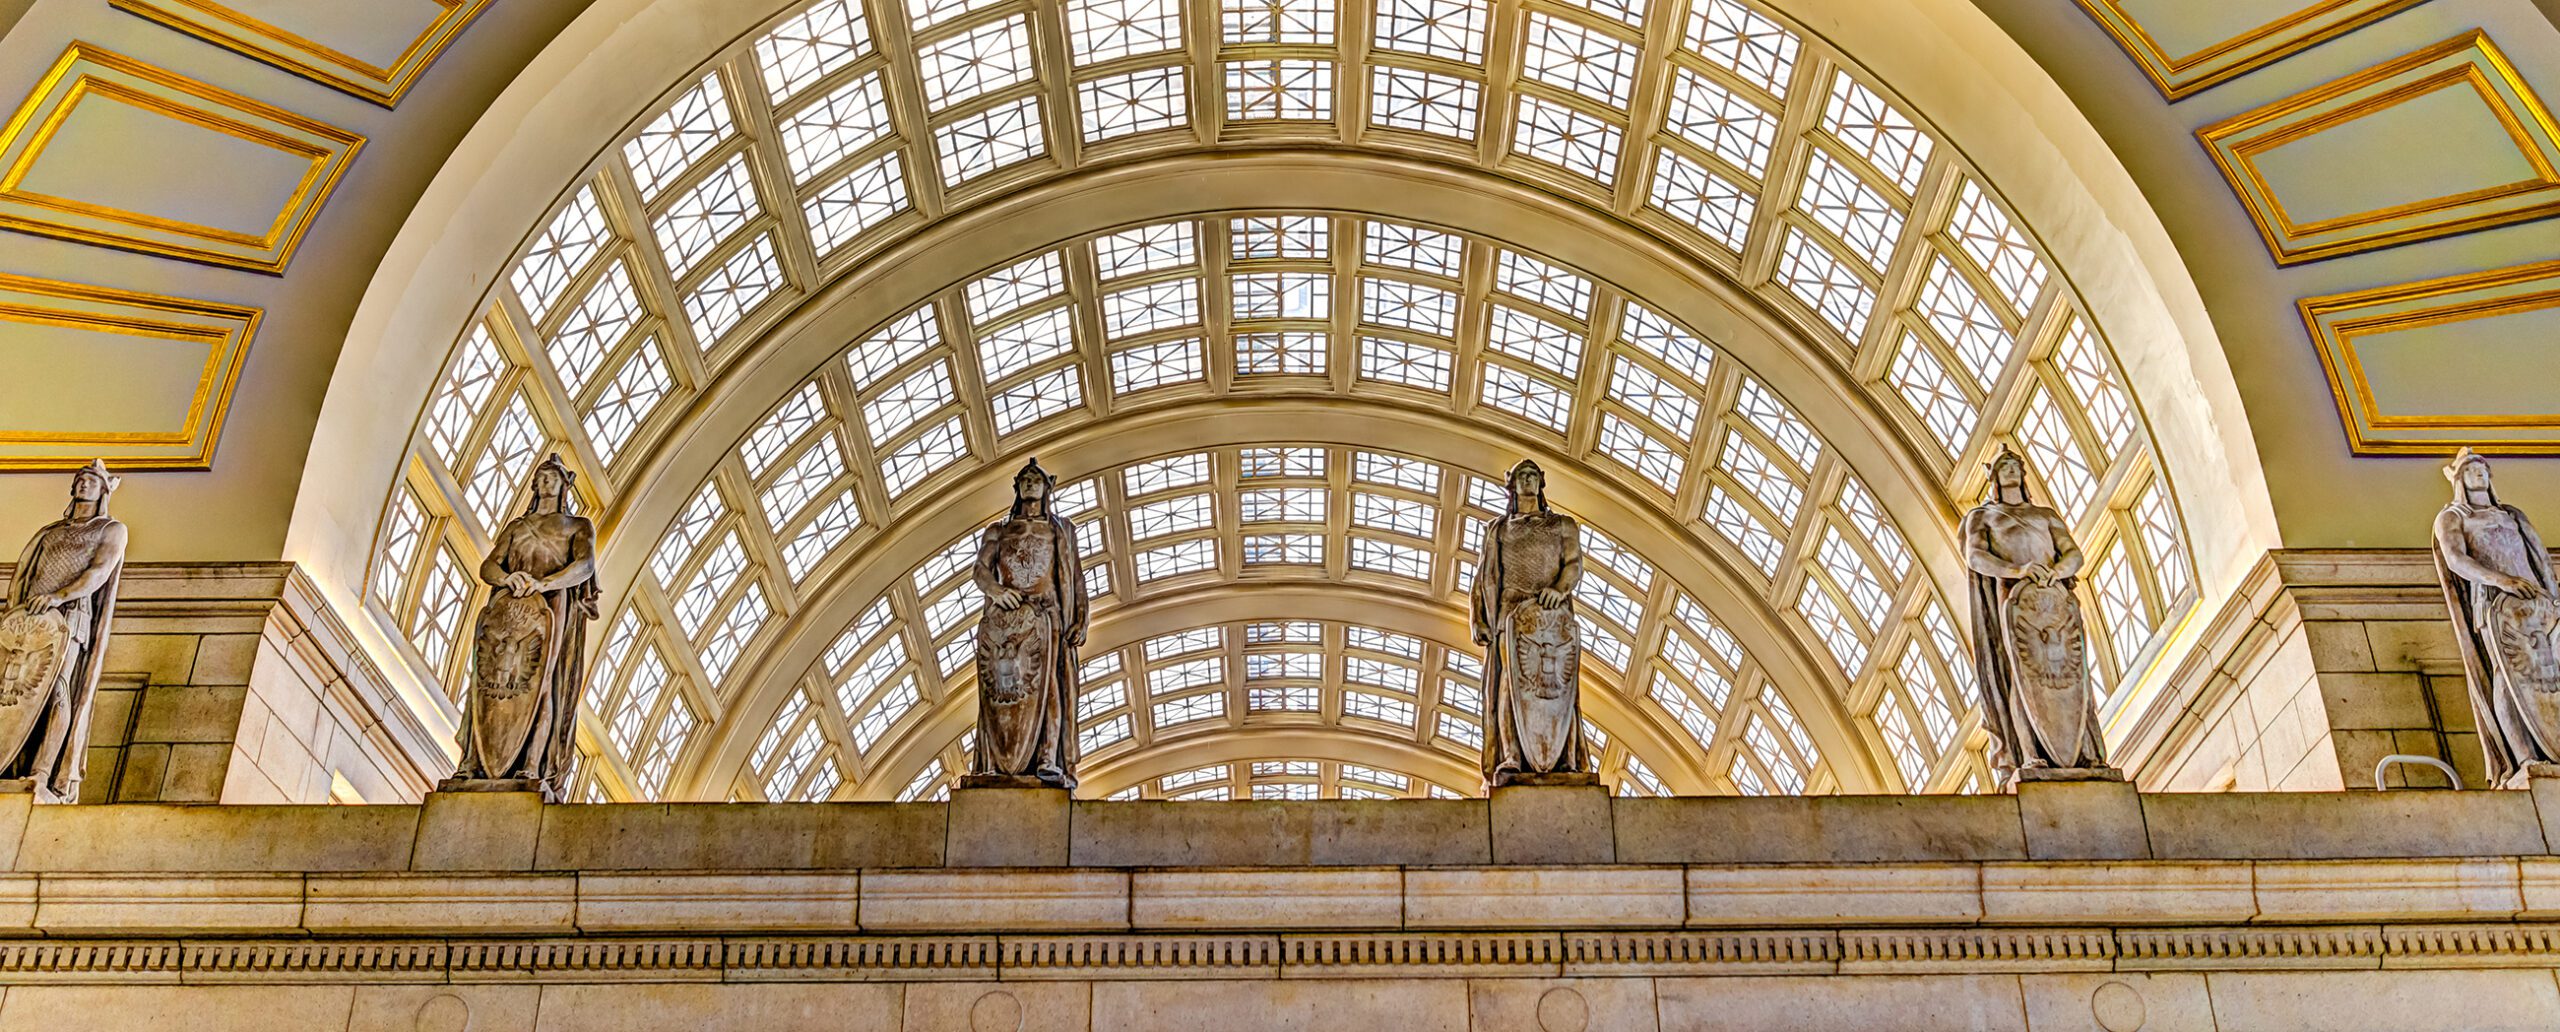 Statues in Main Hall featuring the Historical Design Elements of Union Station.